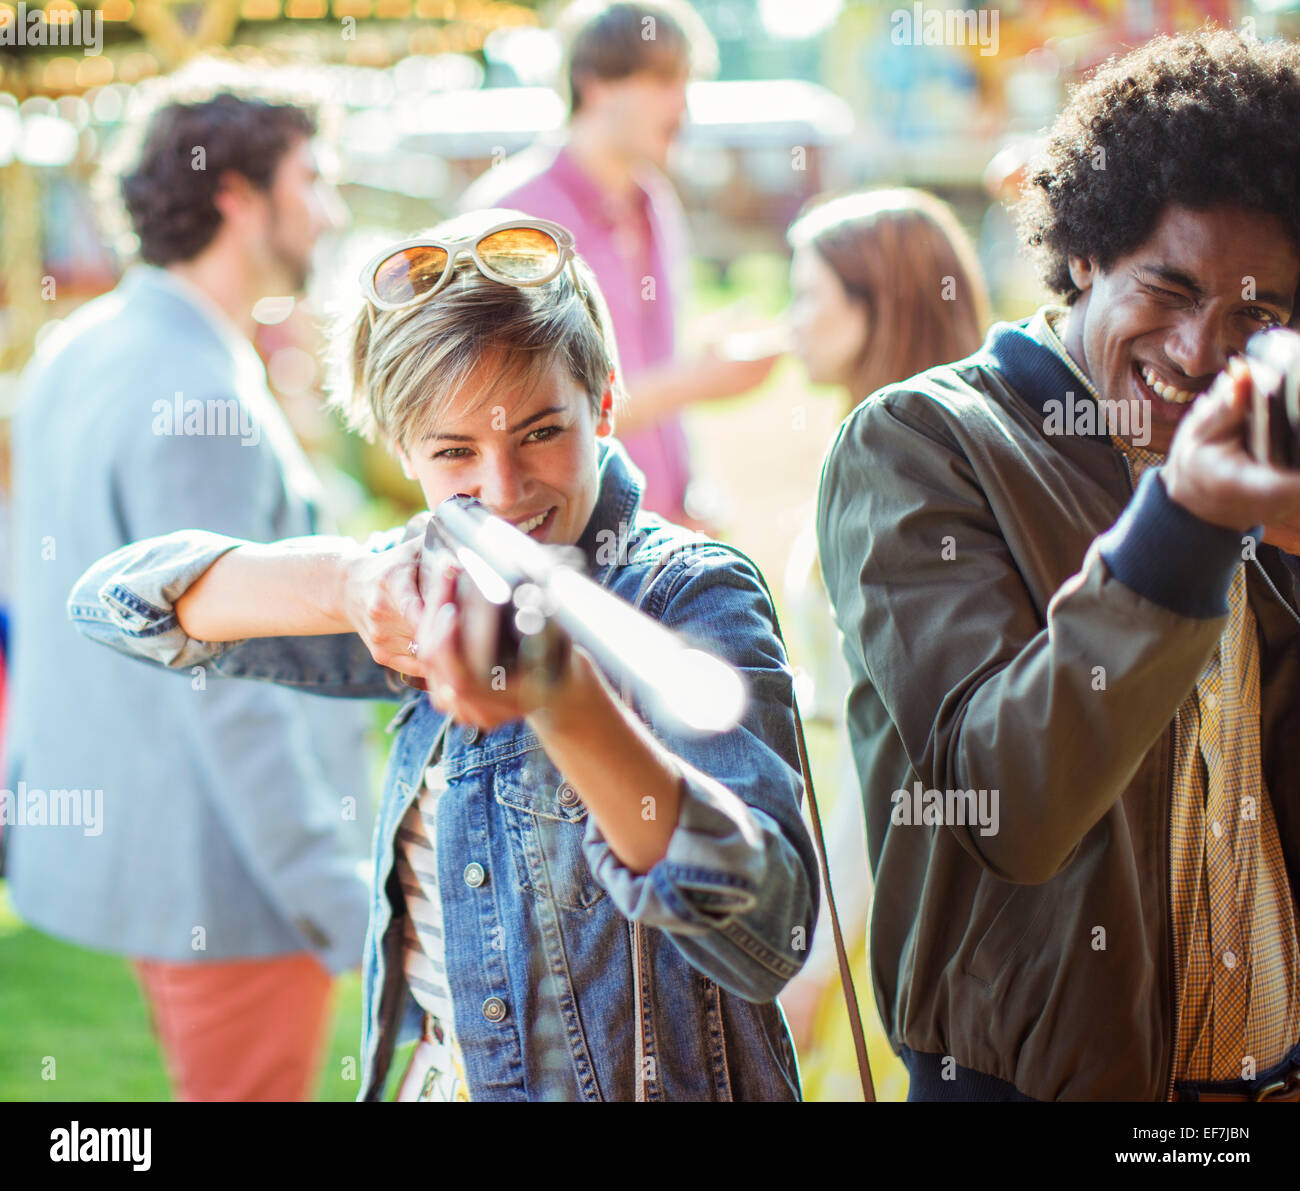 Young couple aiming with guns in amusement park Stock Photo